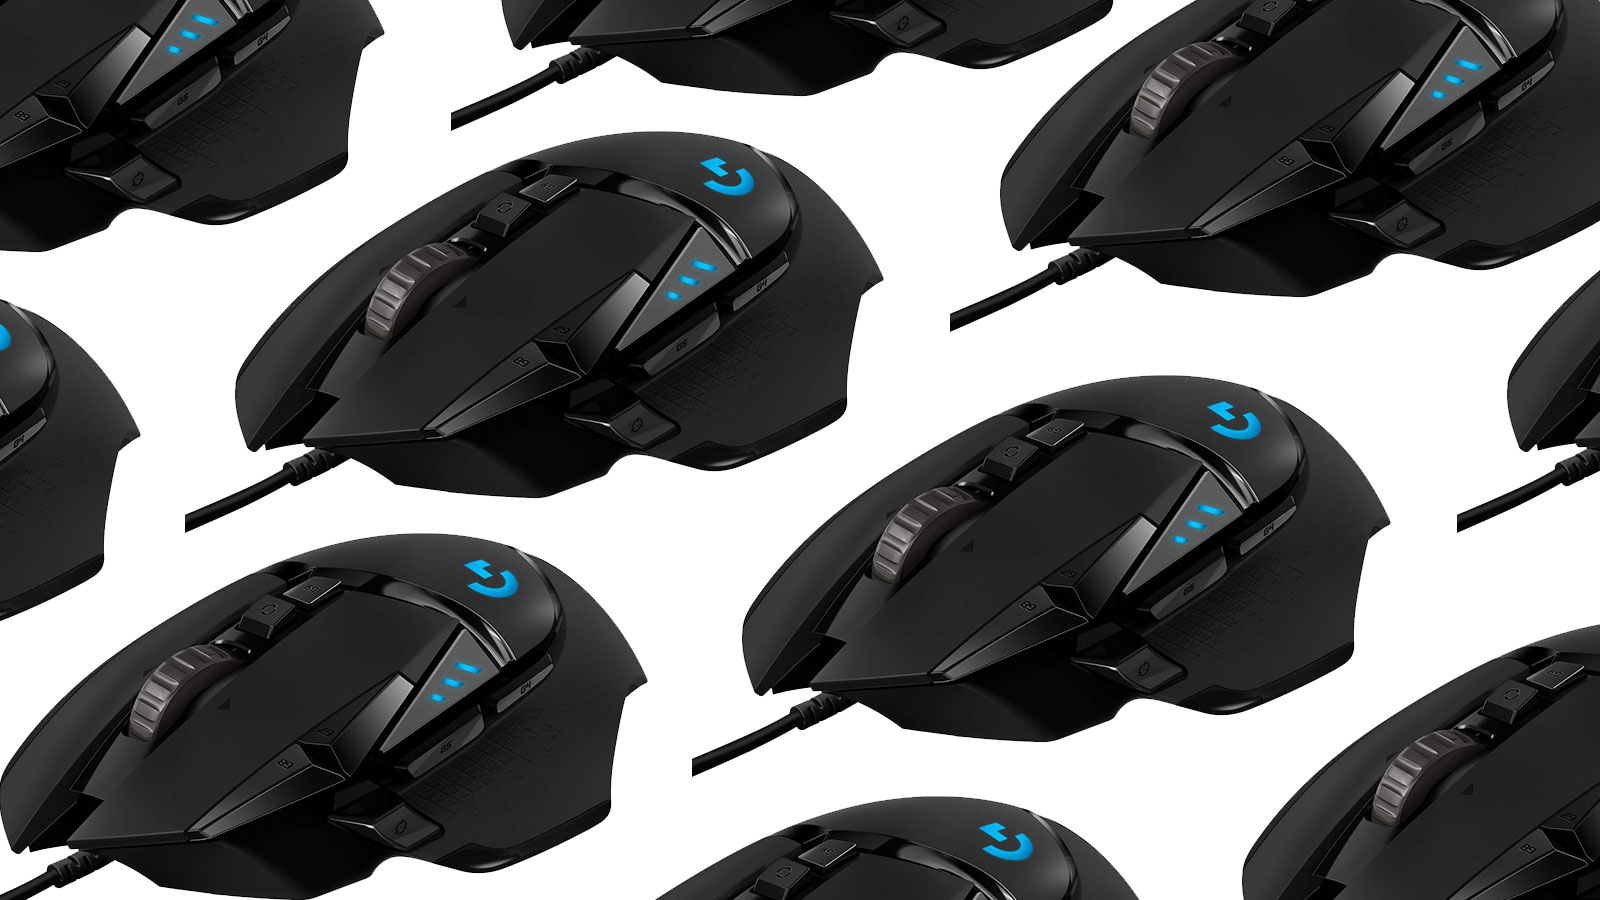 An array of Logitech G502 gaming mice on a plain background